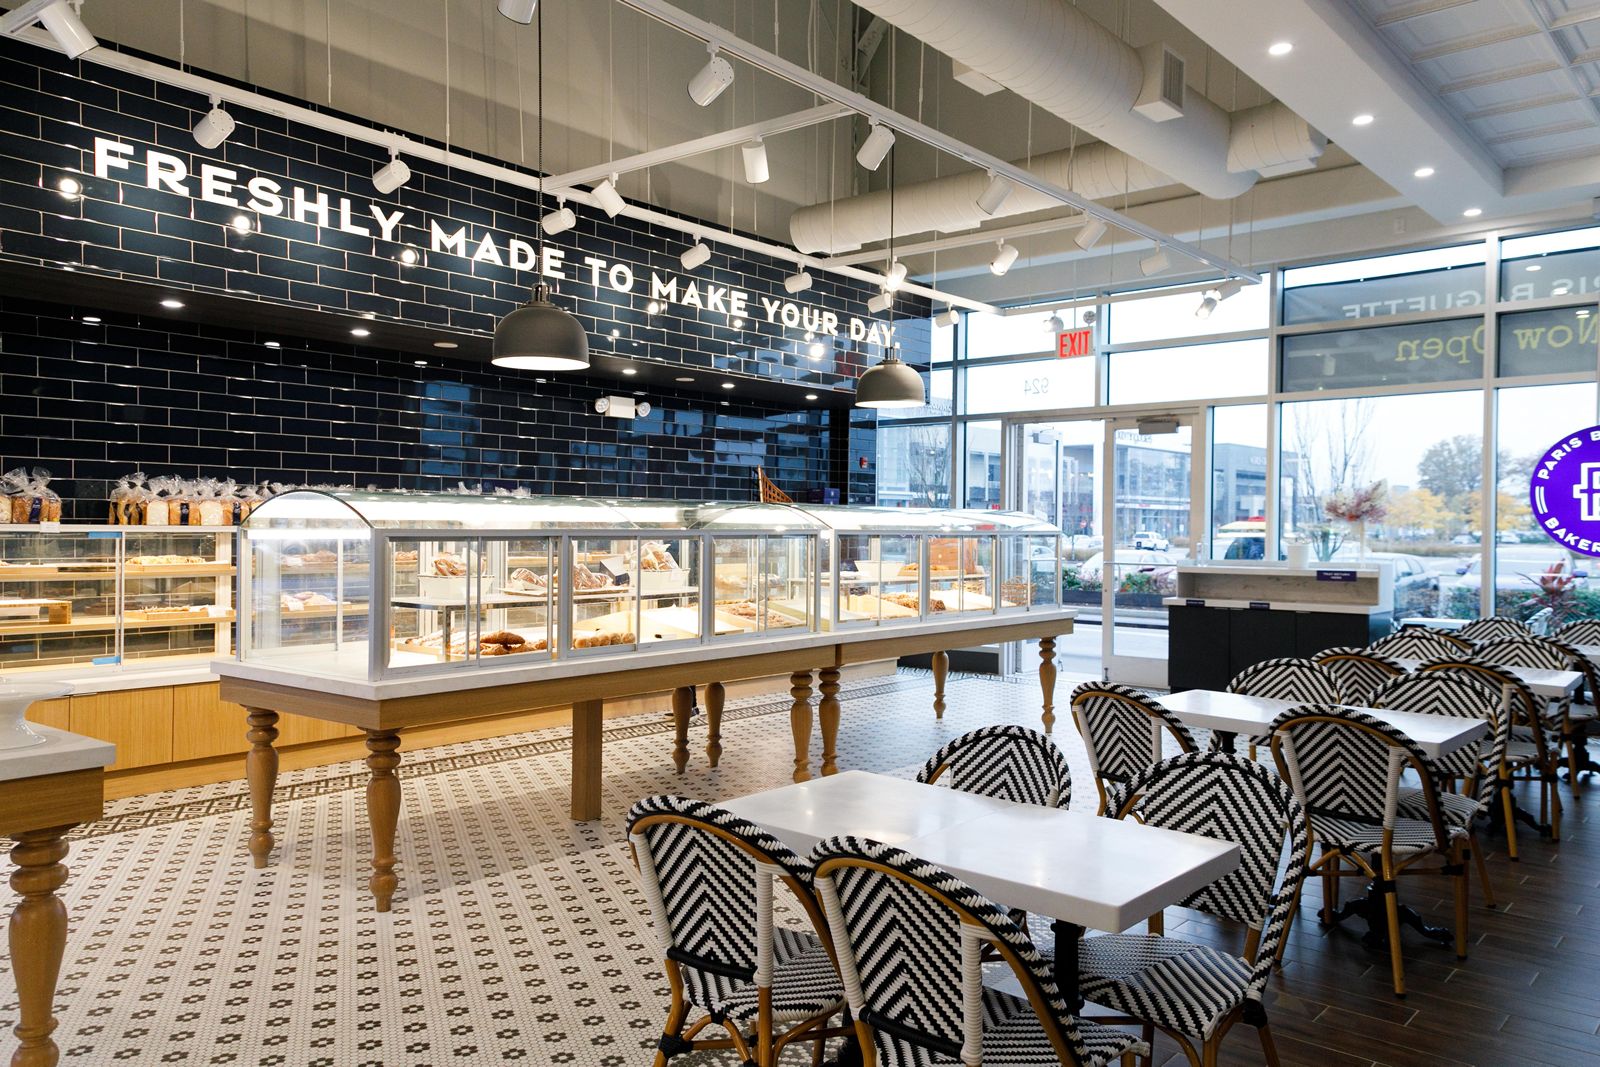 Paris Baguette Continues To Dominate the Bakery Franchise Industry, Signs Agreement in Westminster, CO for One Location